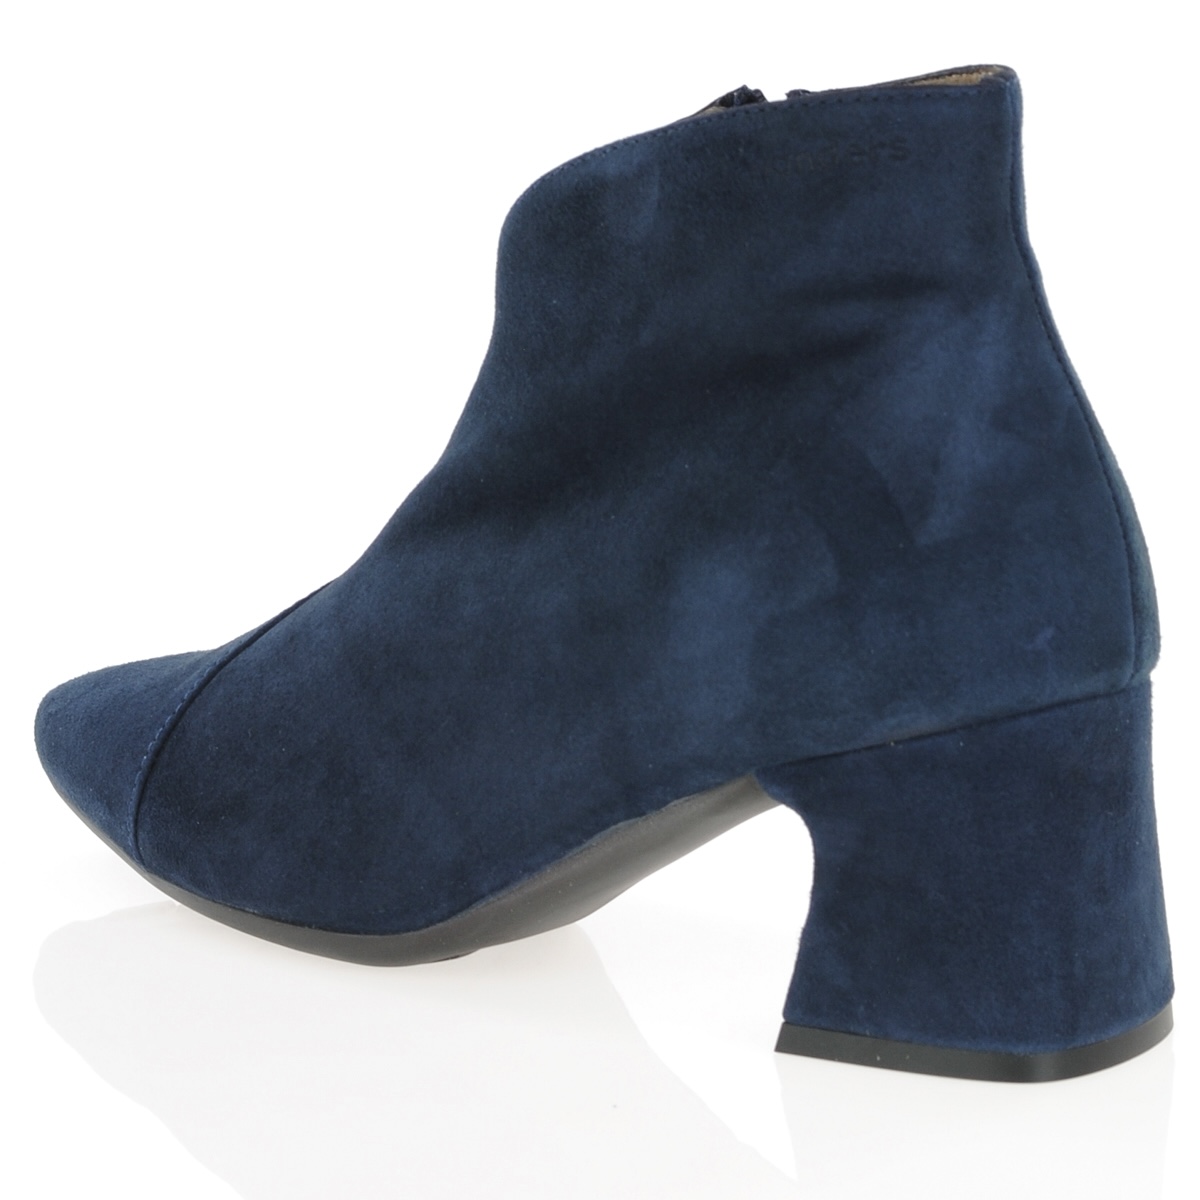 Wonders Pointed Ankle Boots in Navy Suede (more sizes on the way)